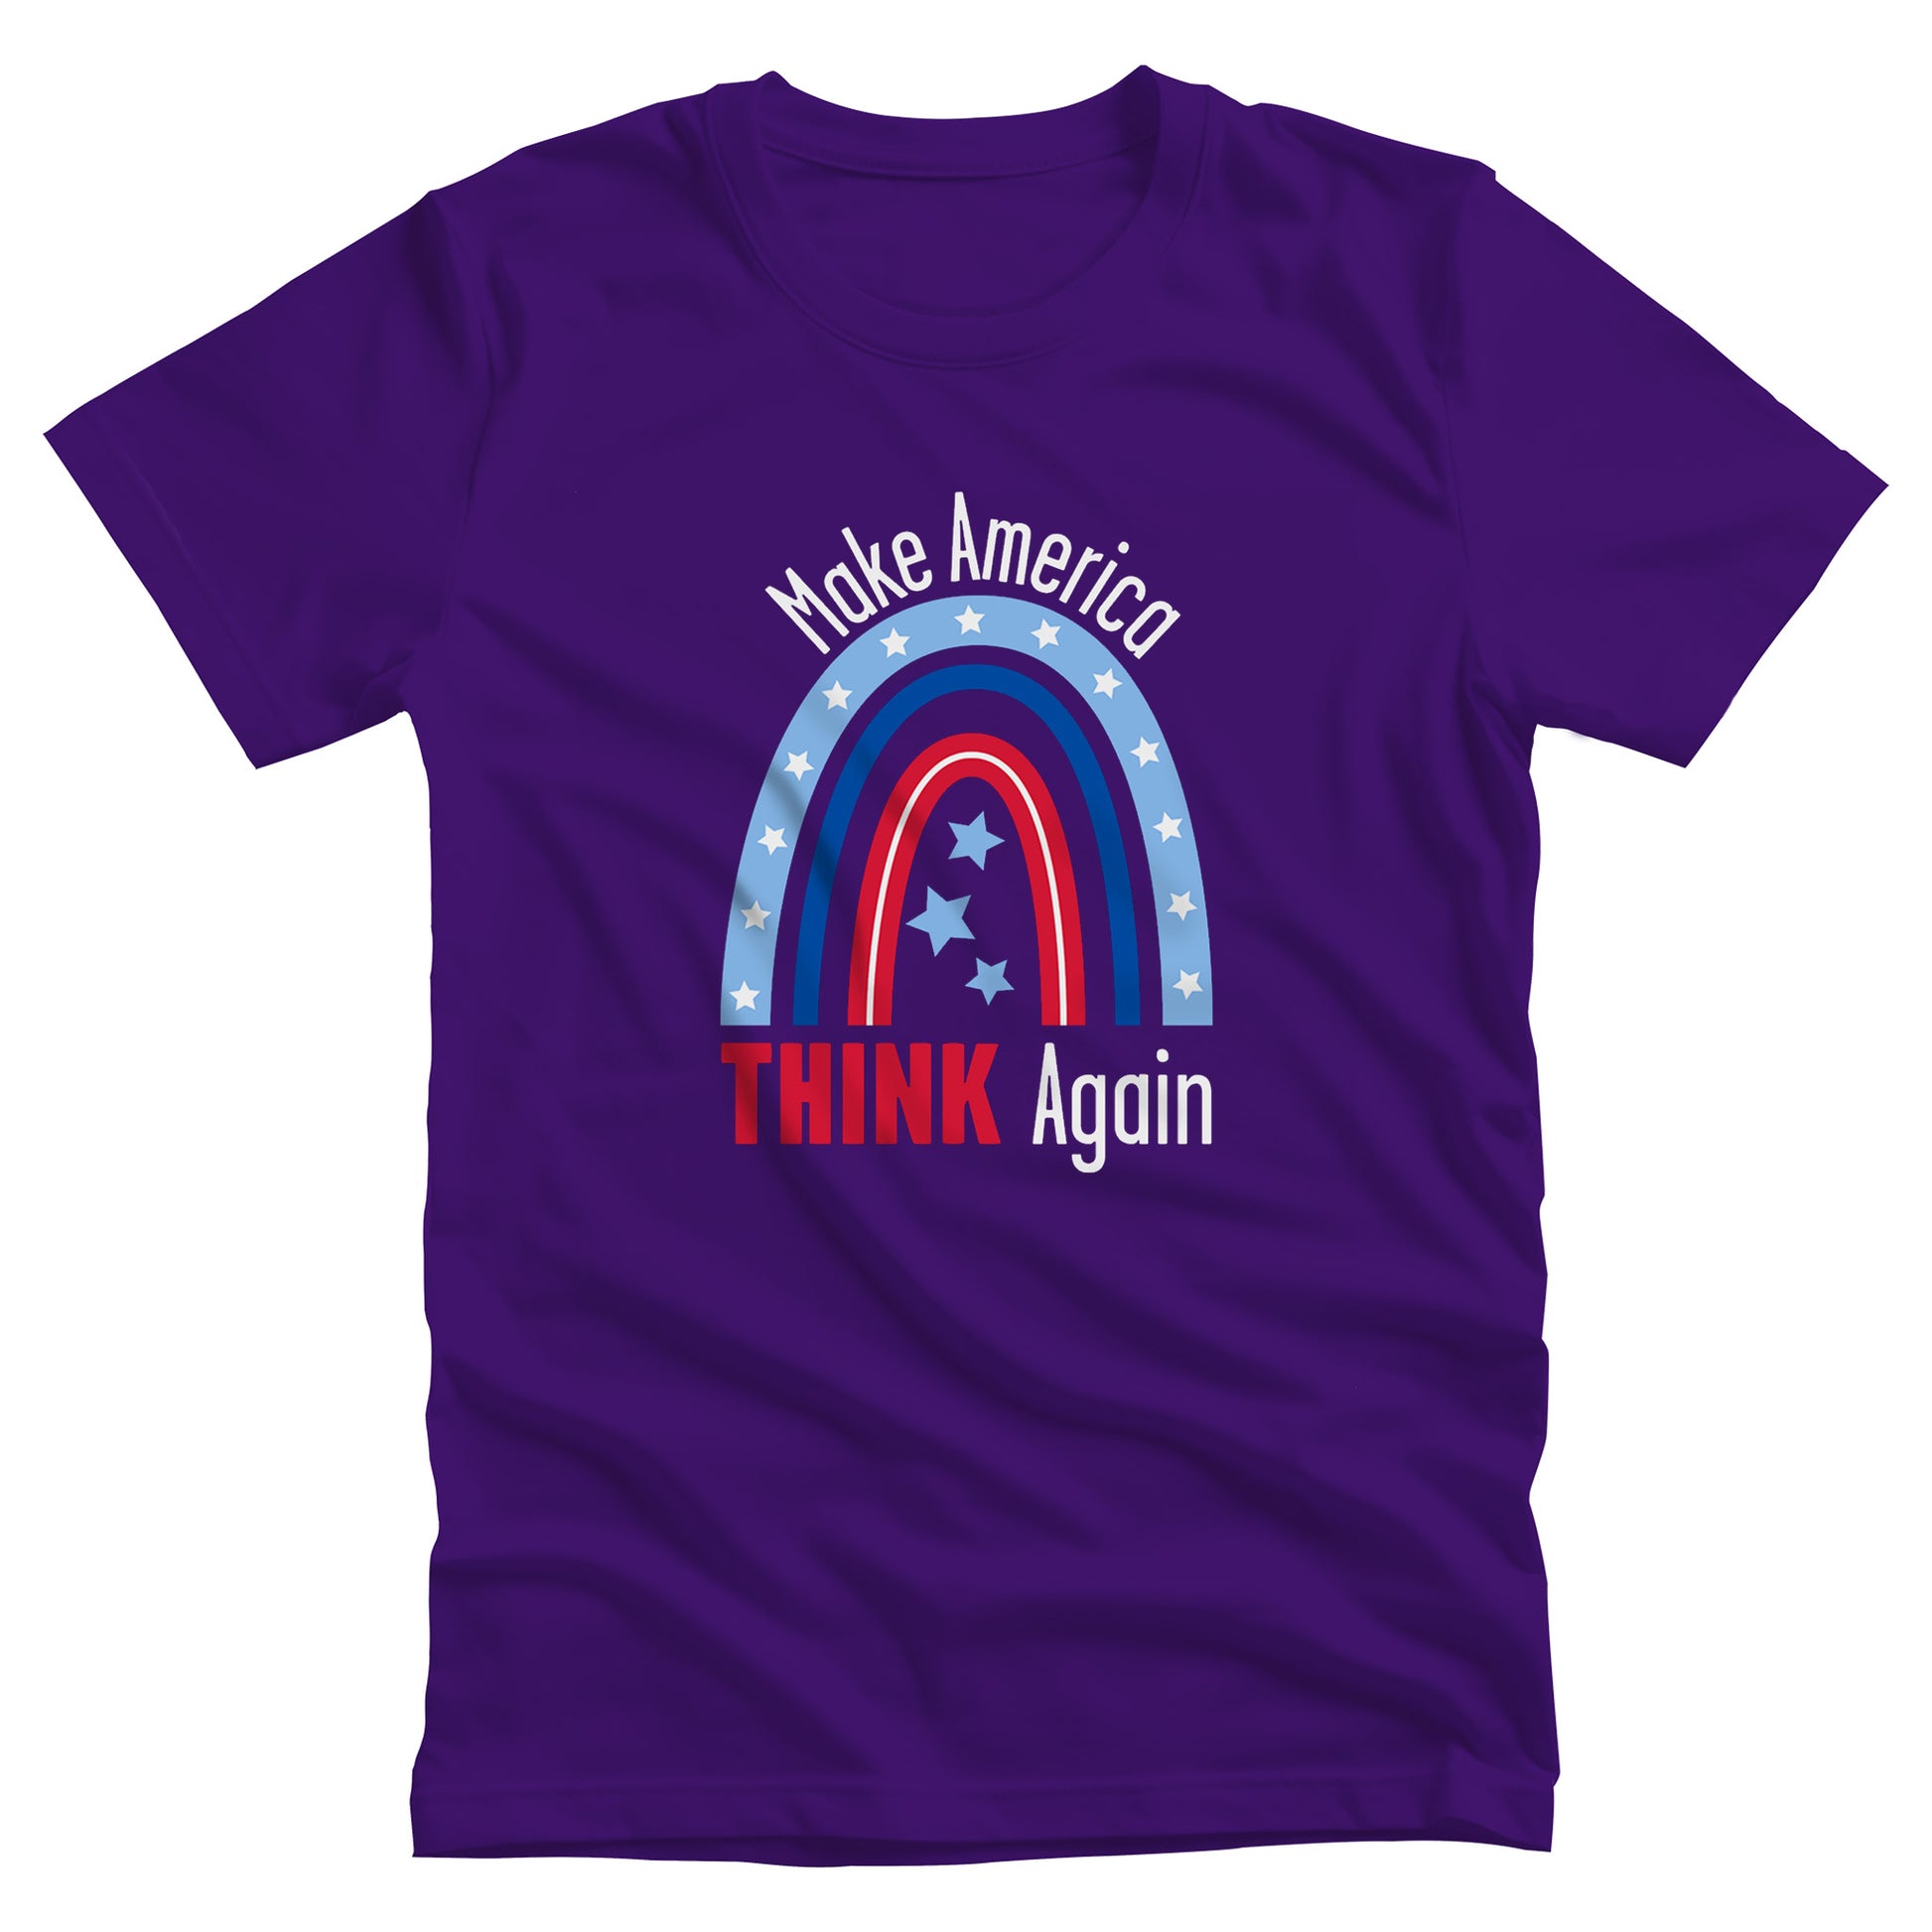 Team Purple color unisex t-shirt that says, “Make America THINK Again” with a graphic of a blue and red rainbow. “Make America” is red and arched over the rainbow. “THINK Again” is beneath the rainbow with “THINK” being blue and “Again” being red.